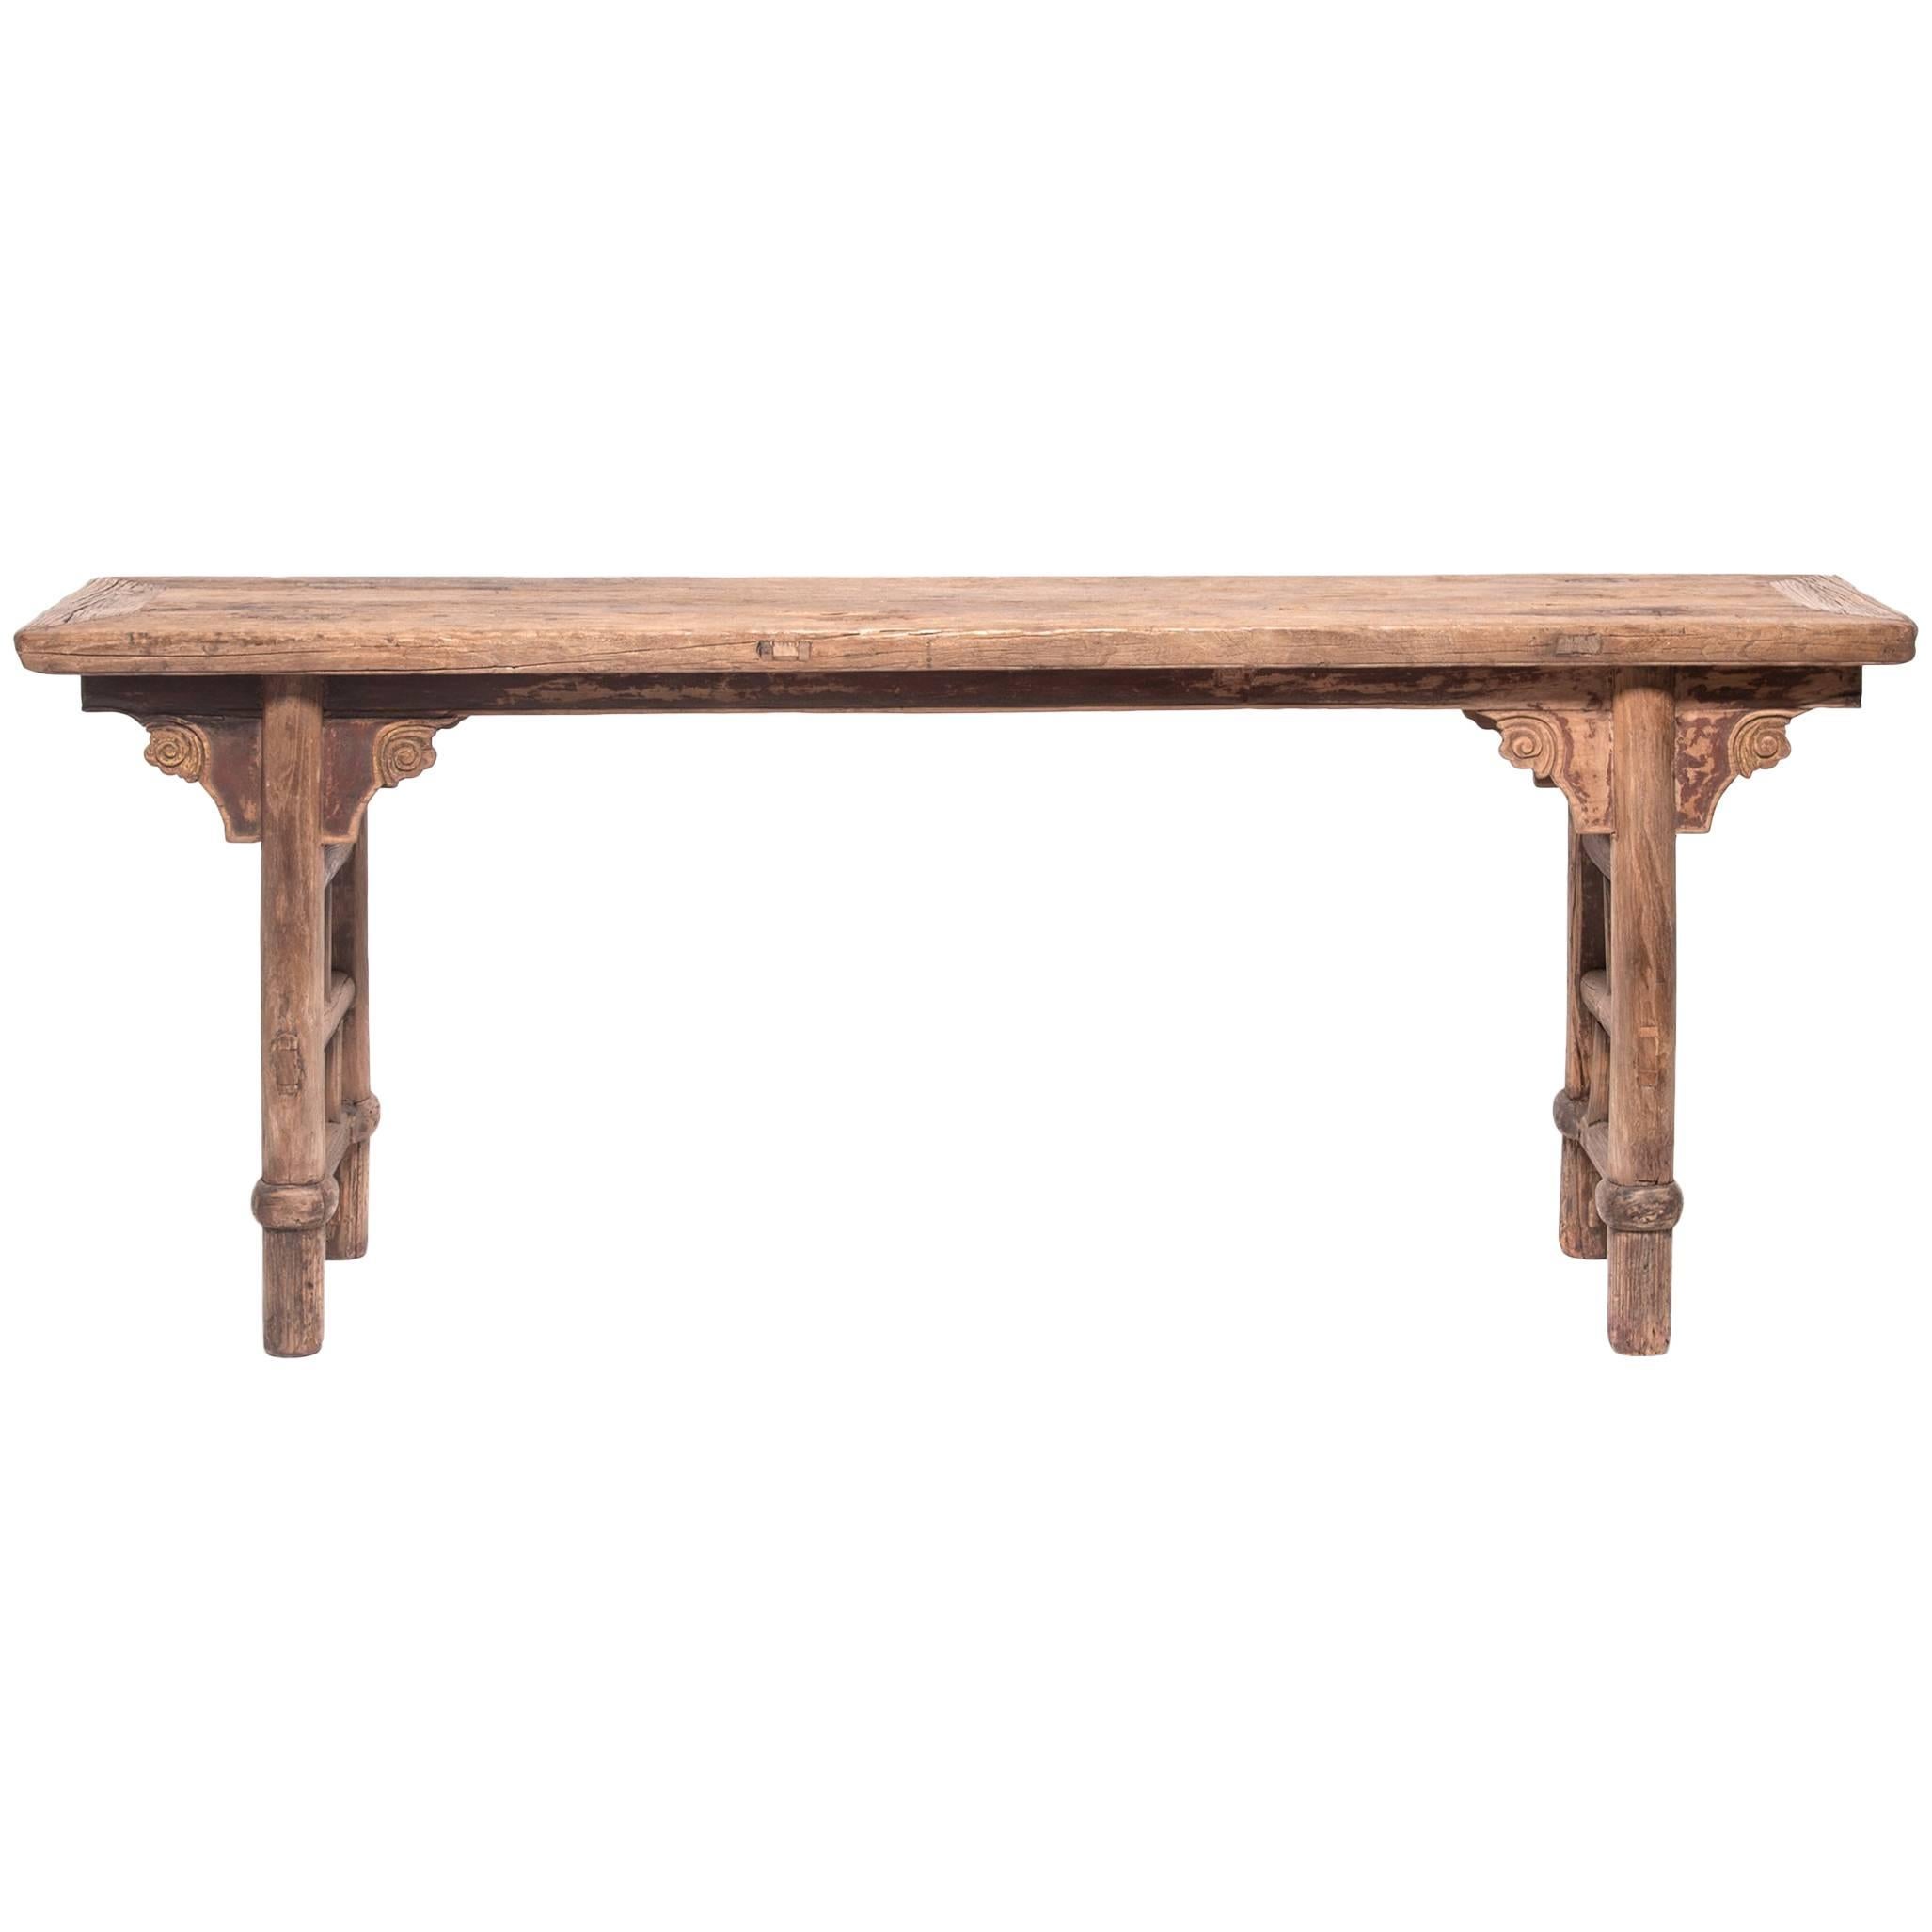 Mid-19th Century Chinese Provincial Altar Table